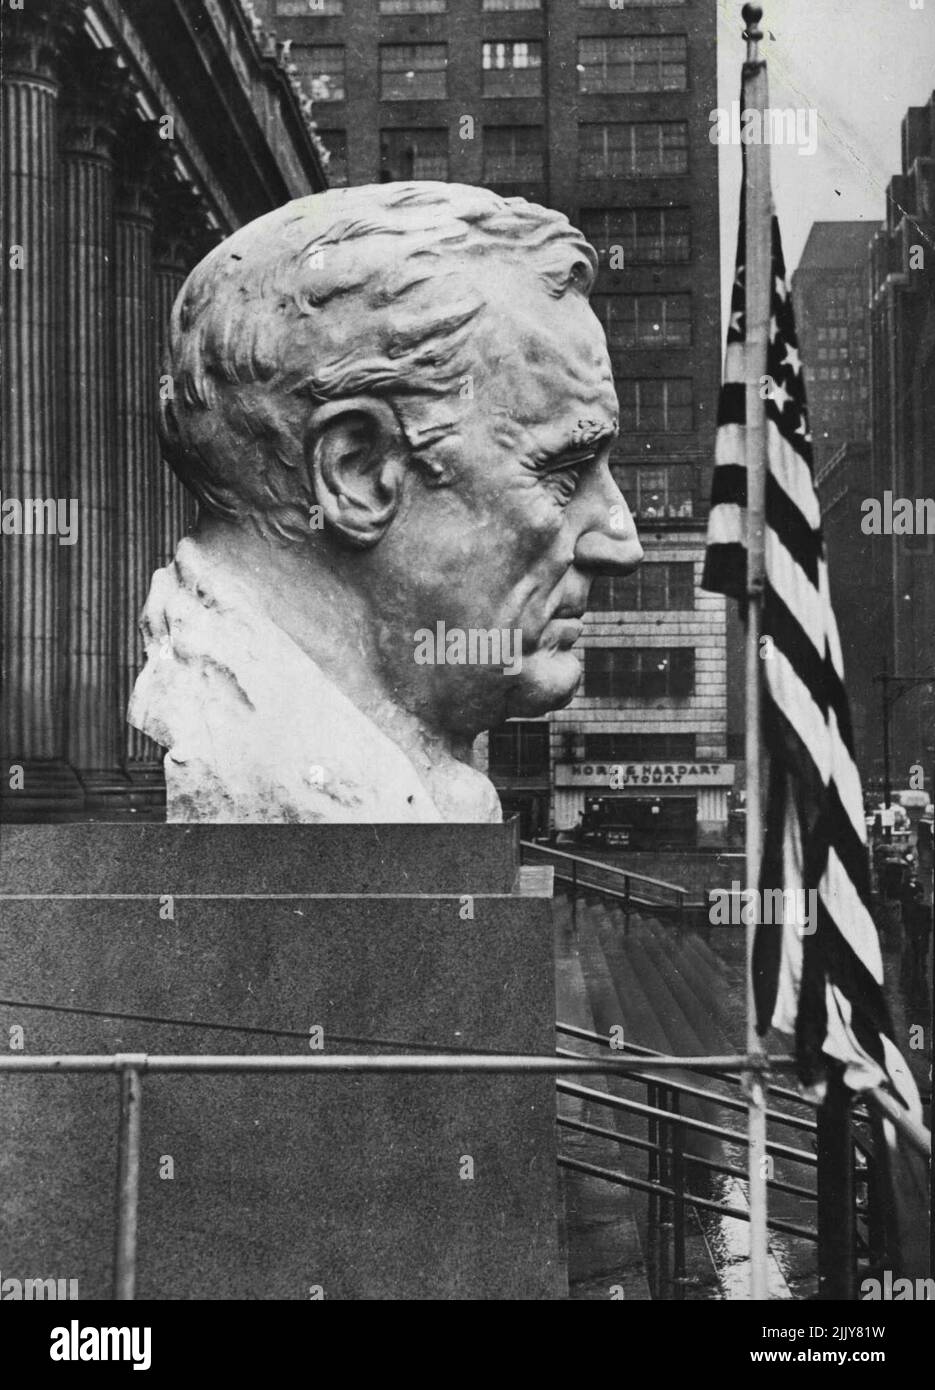 New Bust Of President Roosevelt. This thirteen-ton bust of President Franklin D. Roosevelt was unveiled in front of the New York City Post Office at the opening of the fund-raising campaign of the Foundation for Infantile Paralysis. It was designed by Stanley Matineau, a private in the U.S. Army. July 5, 1943. (Photo by U.S. Office Of Information Picture). Stock Photo